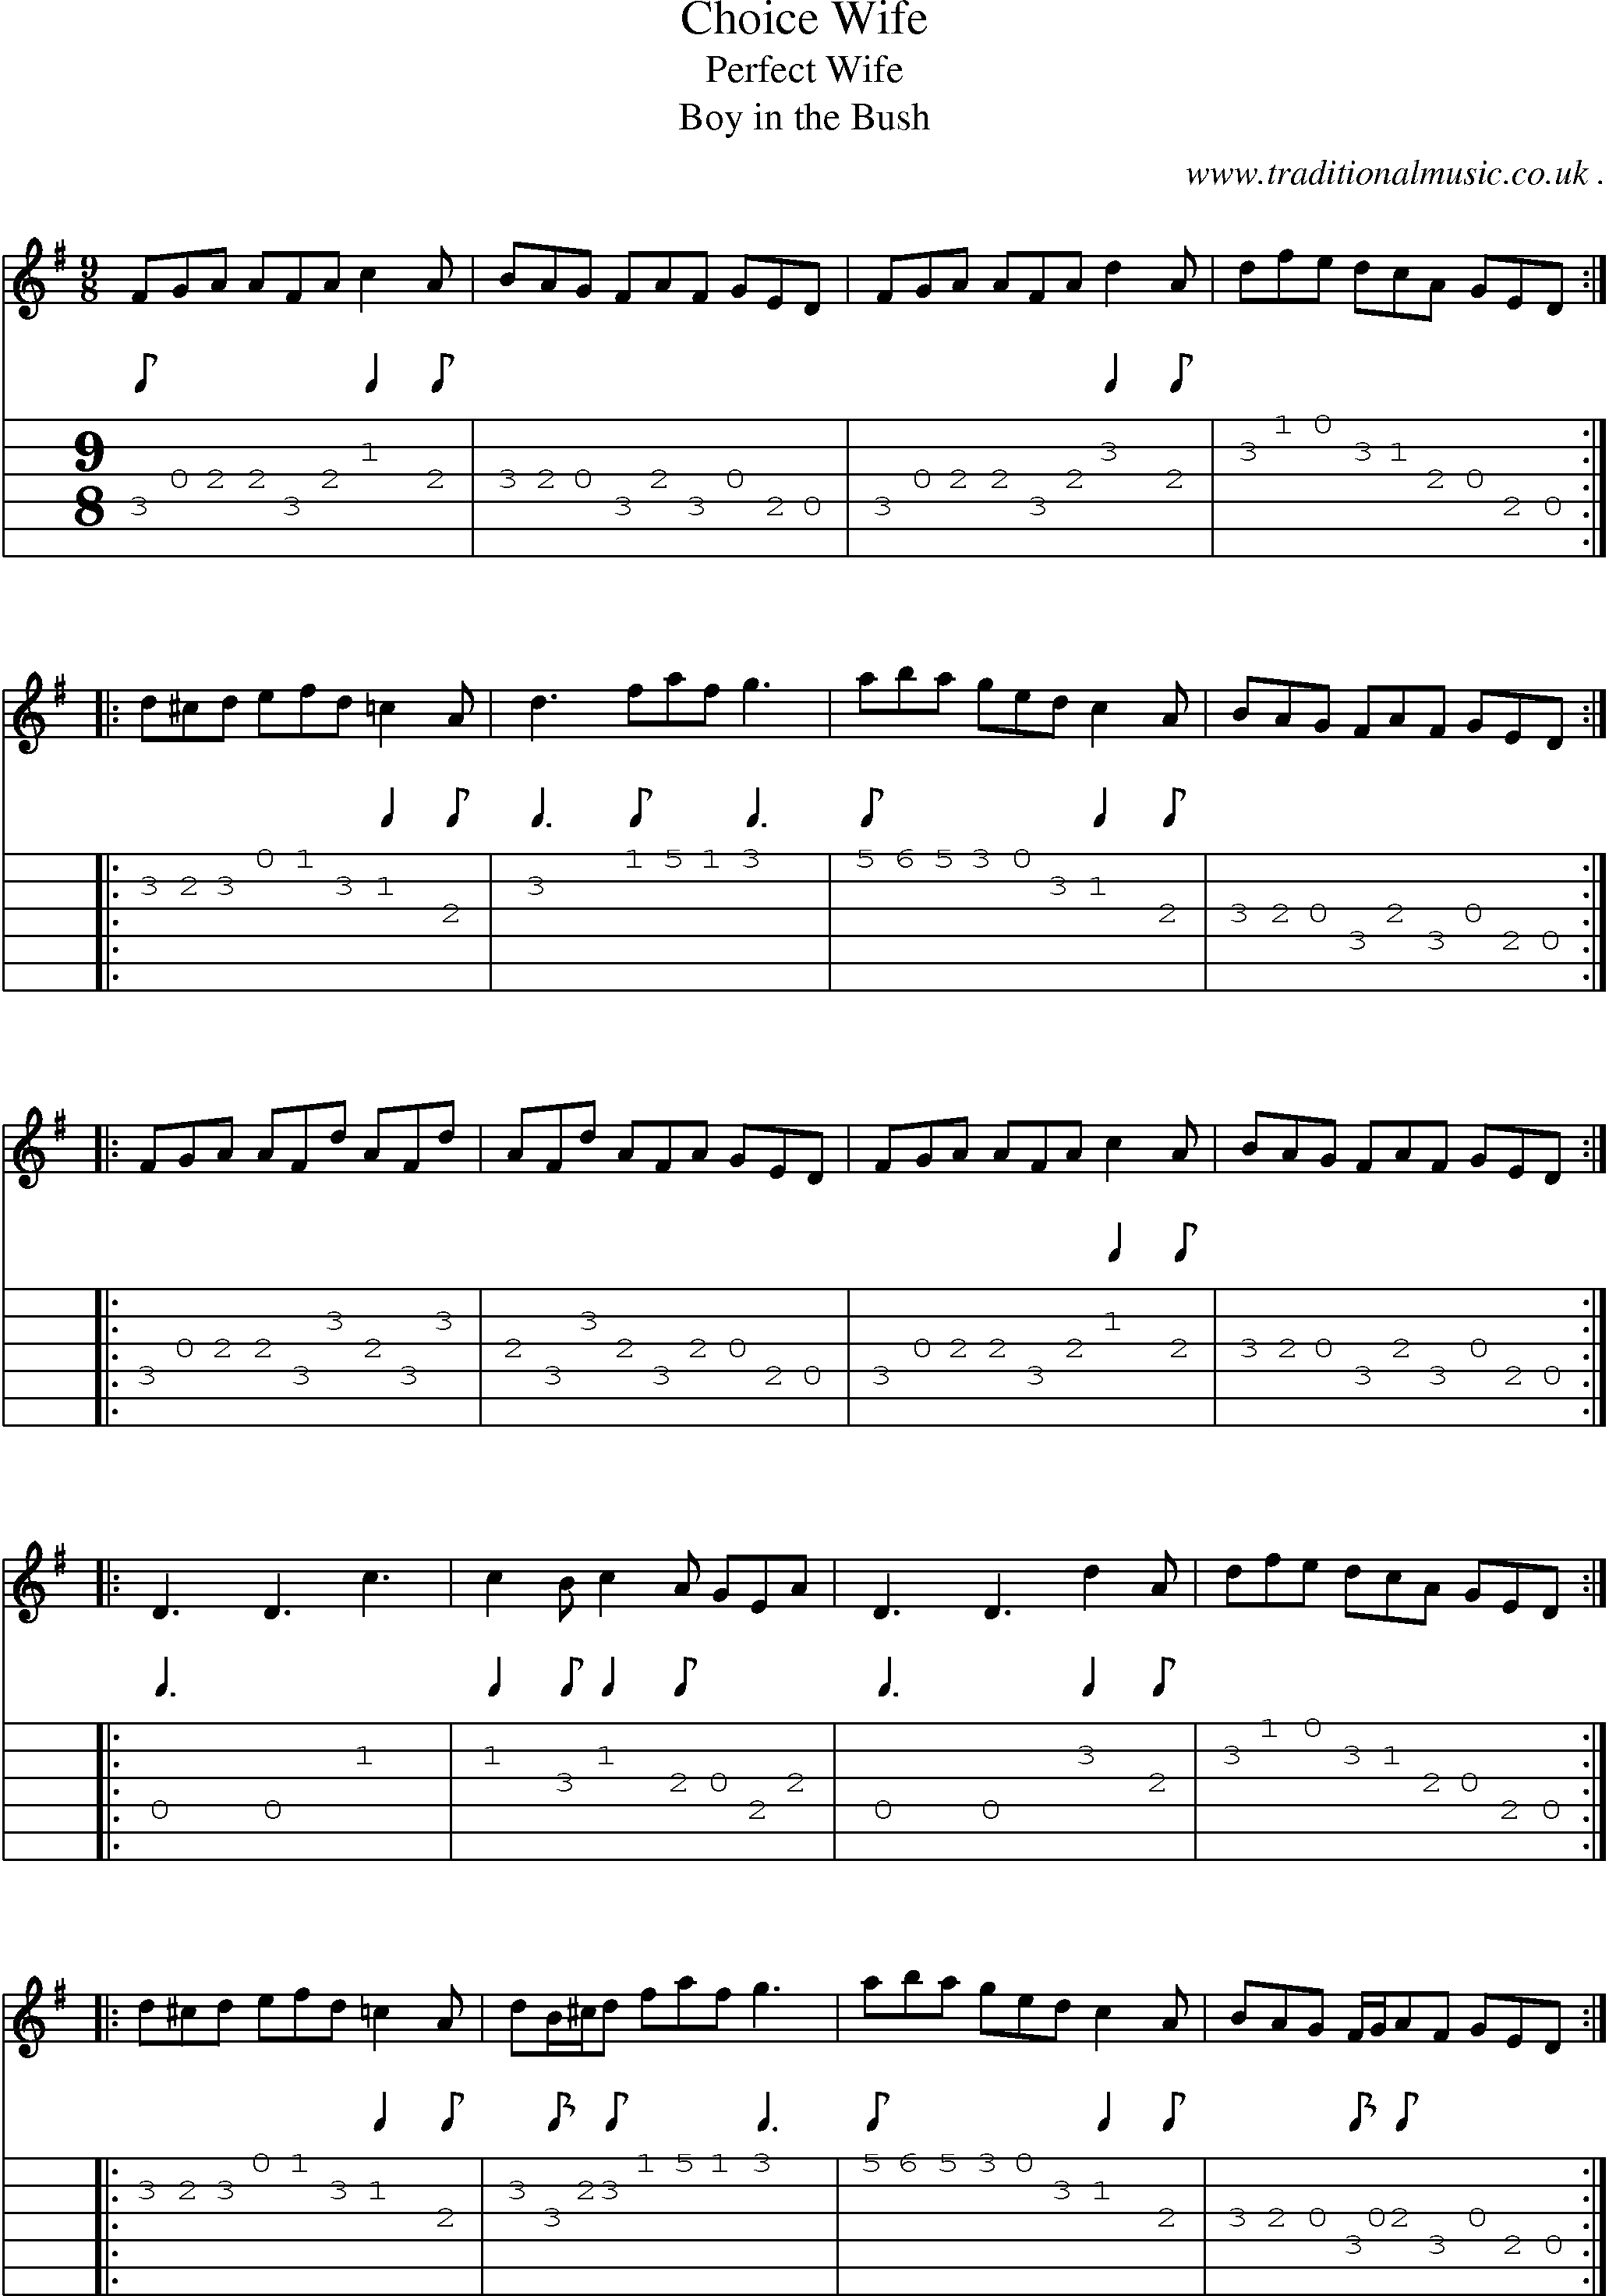 Sheet-Music and Guitar Tabs for Choice Wife